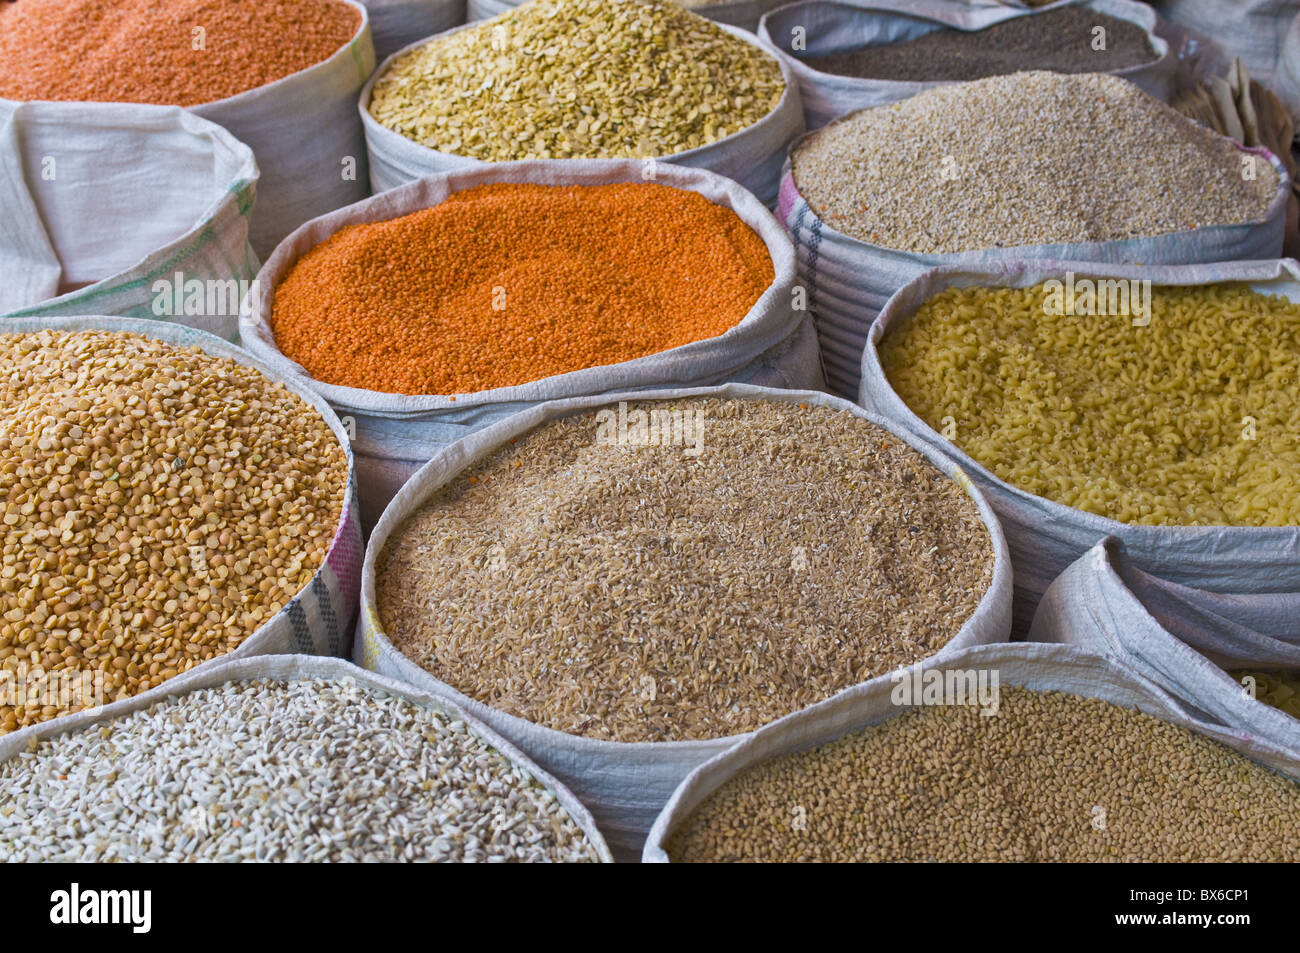 Spices for sale, Addis Ababa, Ethiopia, Africa Stock Photo